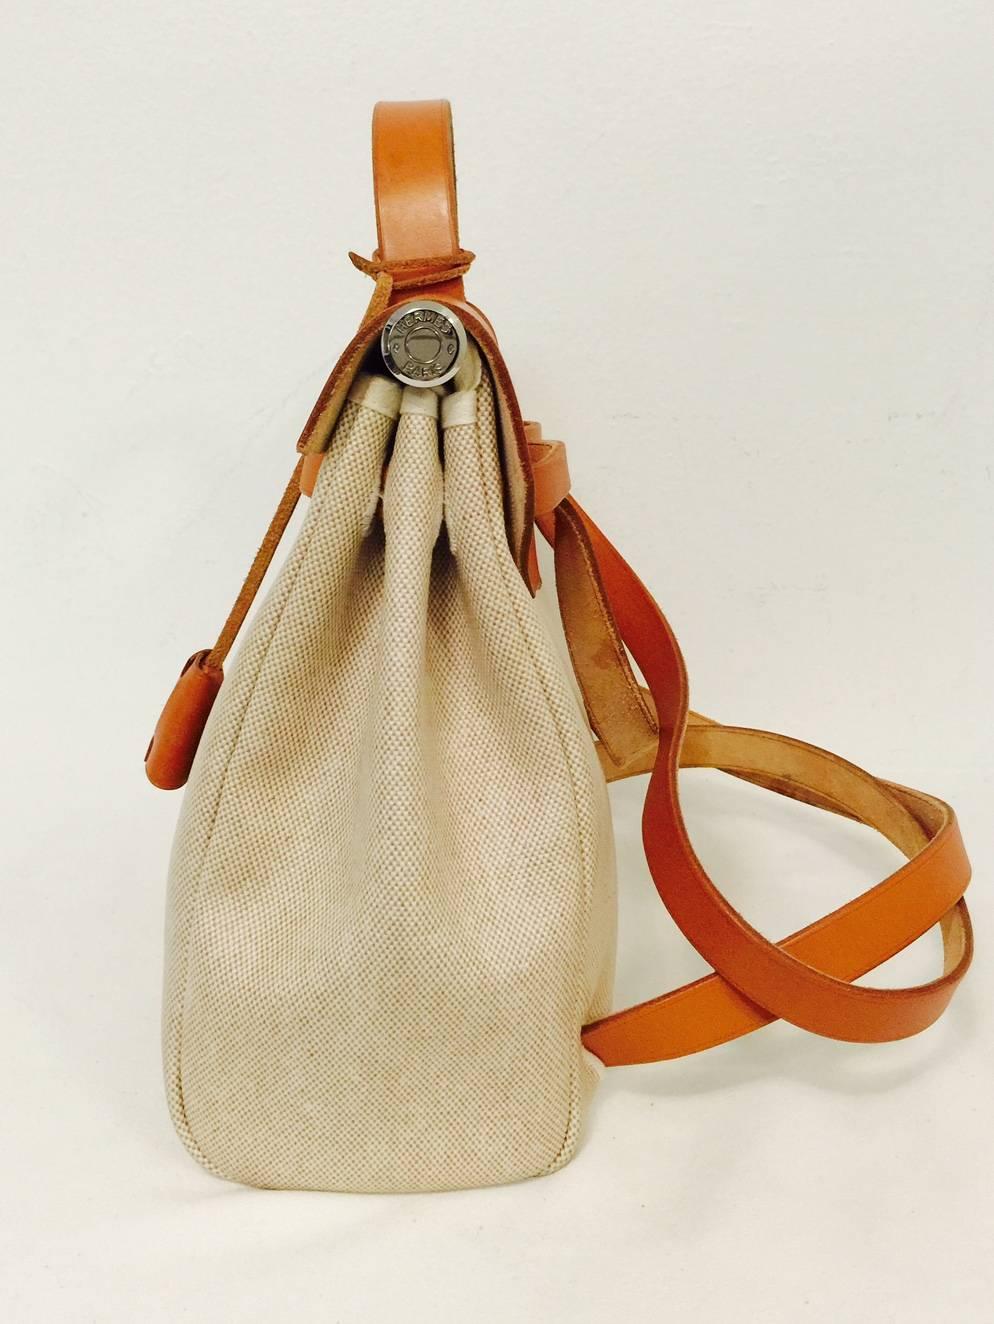 2 bags for the price of one!  Immaculate beige toile Hermès Herbag PM bag with tan leather trim will be admired from afar and up close!  The set comes with two bottom beige canvas shells and an interchangeable leather top.  Top handle or shoulder